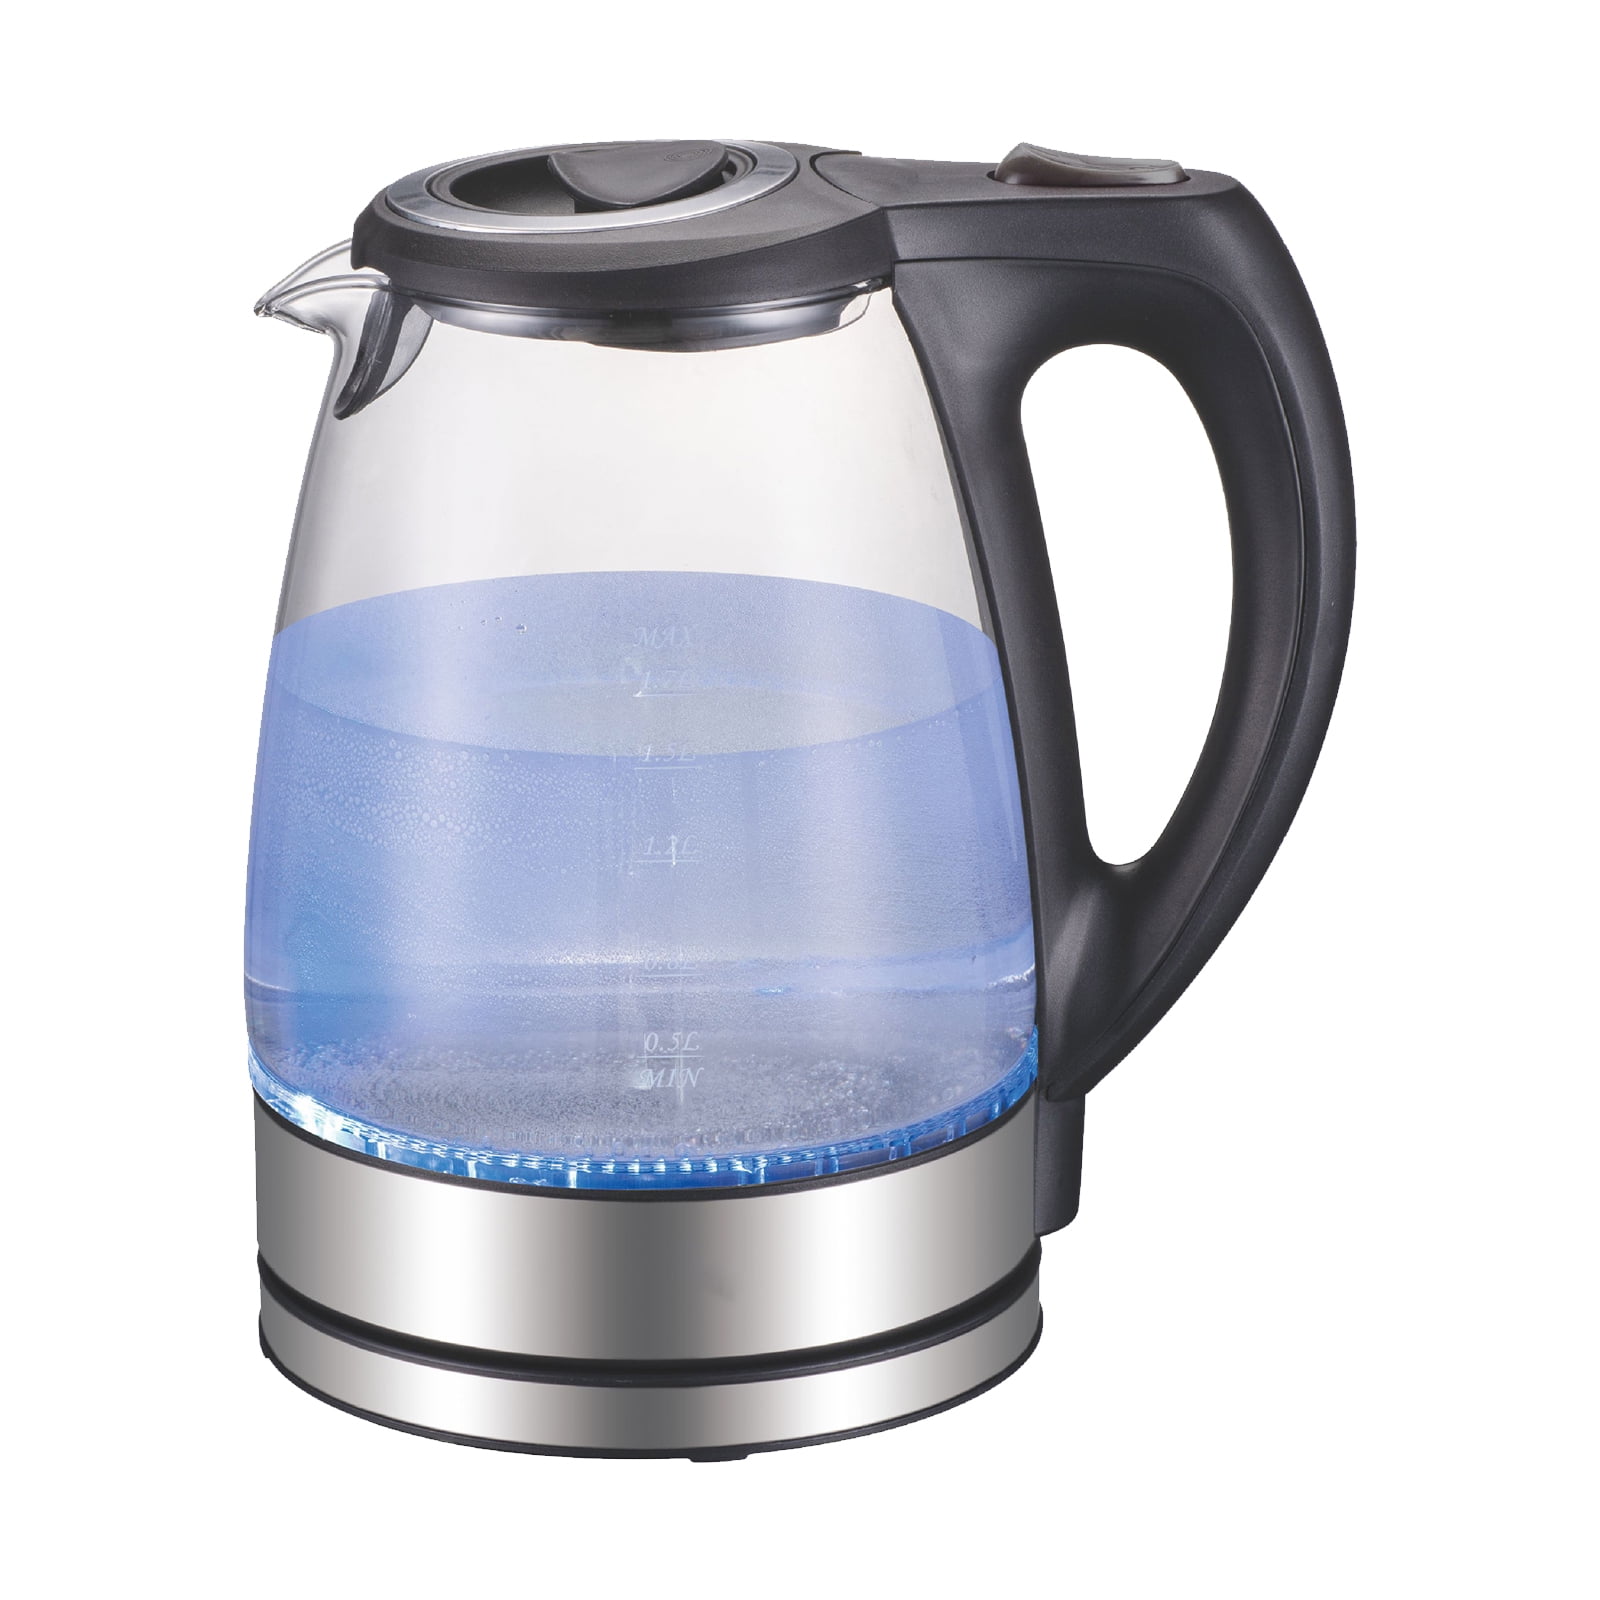 Glass Hot Water Taylor Swoden Kettle Electric for Tea and Coffee 1.7 Liter Fast Boiling Electric Kettle Cordless Water Boiler with Auto Shutoff & Boil